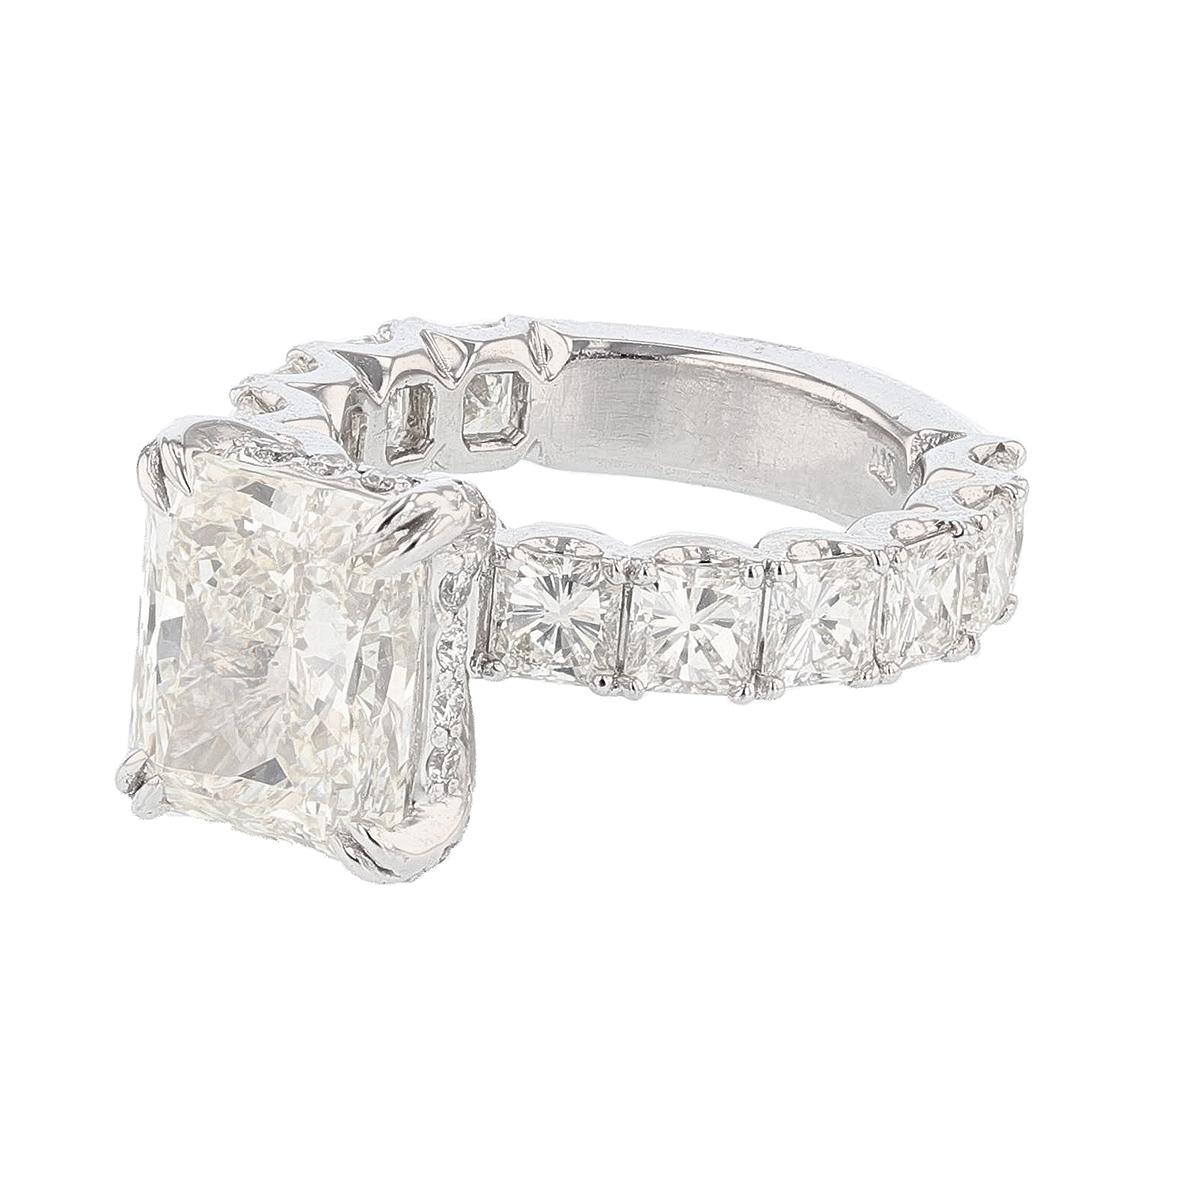 This ring is made in platinum and 14K  white gold diamond ring. The center diamond is a 5.13ct GIA certified radiant cut diamond with a color grade (K) and clarity grade (VS2) clarity. The certificate number is 